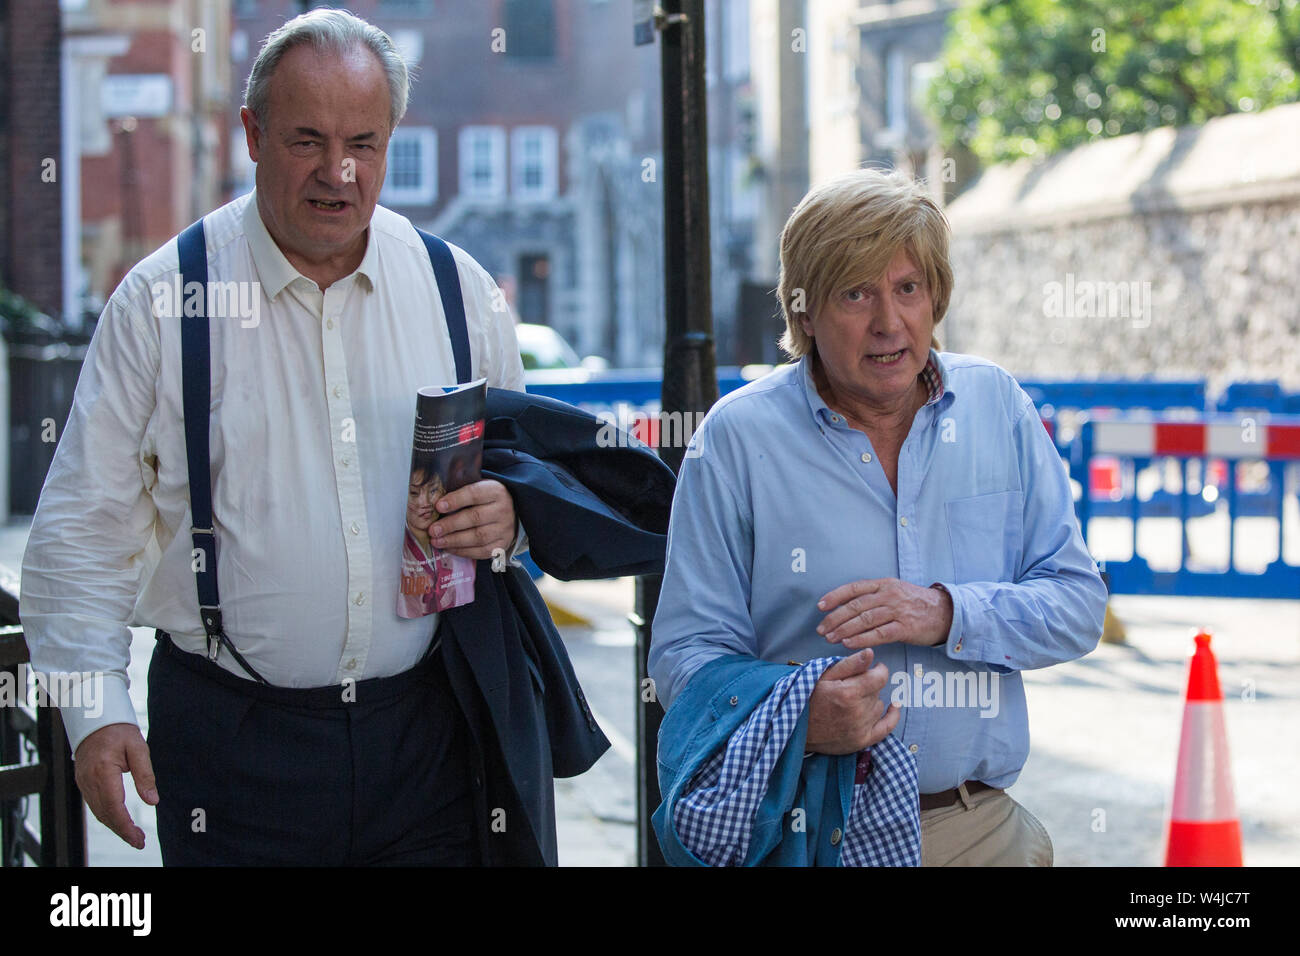 London, UK. 23 July, 2019. James Gray (l), Conservative MP for North Wiltshire, and Michael Fabricant (r), Conservative MP for Lichfield, leave after attending a celebration in Westminster of Boris Johnson’s election as Conservative Party leader and replacement of Theresa May as Prime Minister organised by the pro-Brexit European Research Group (ERG). Credit: Mark Kerrison/Alamy Live News Stock Photo